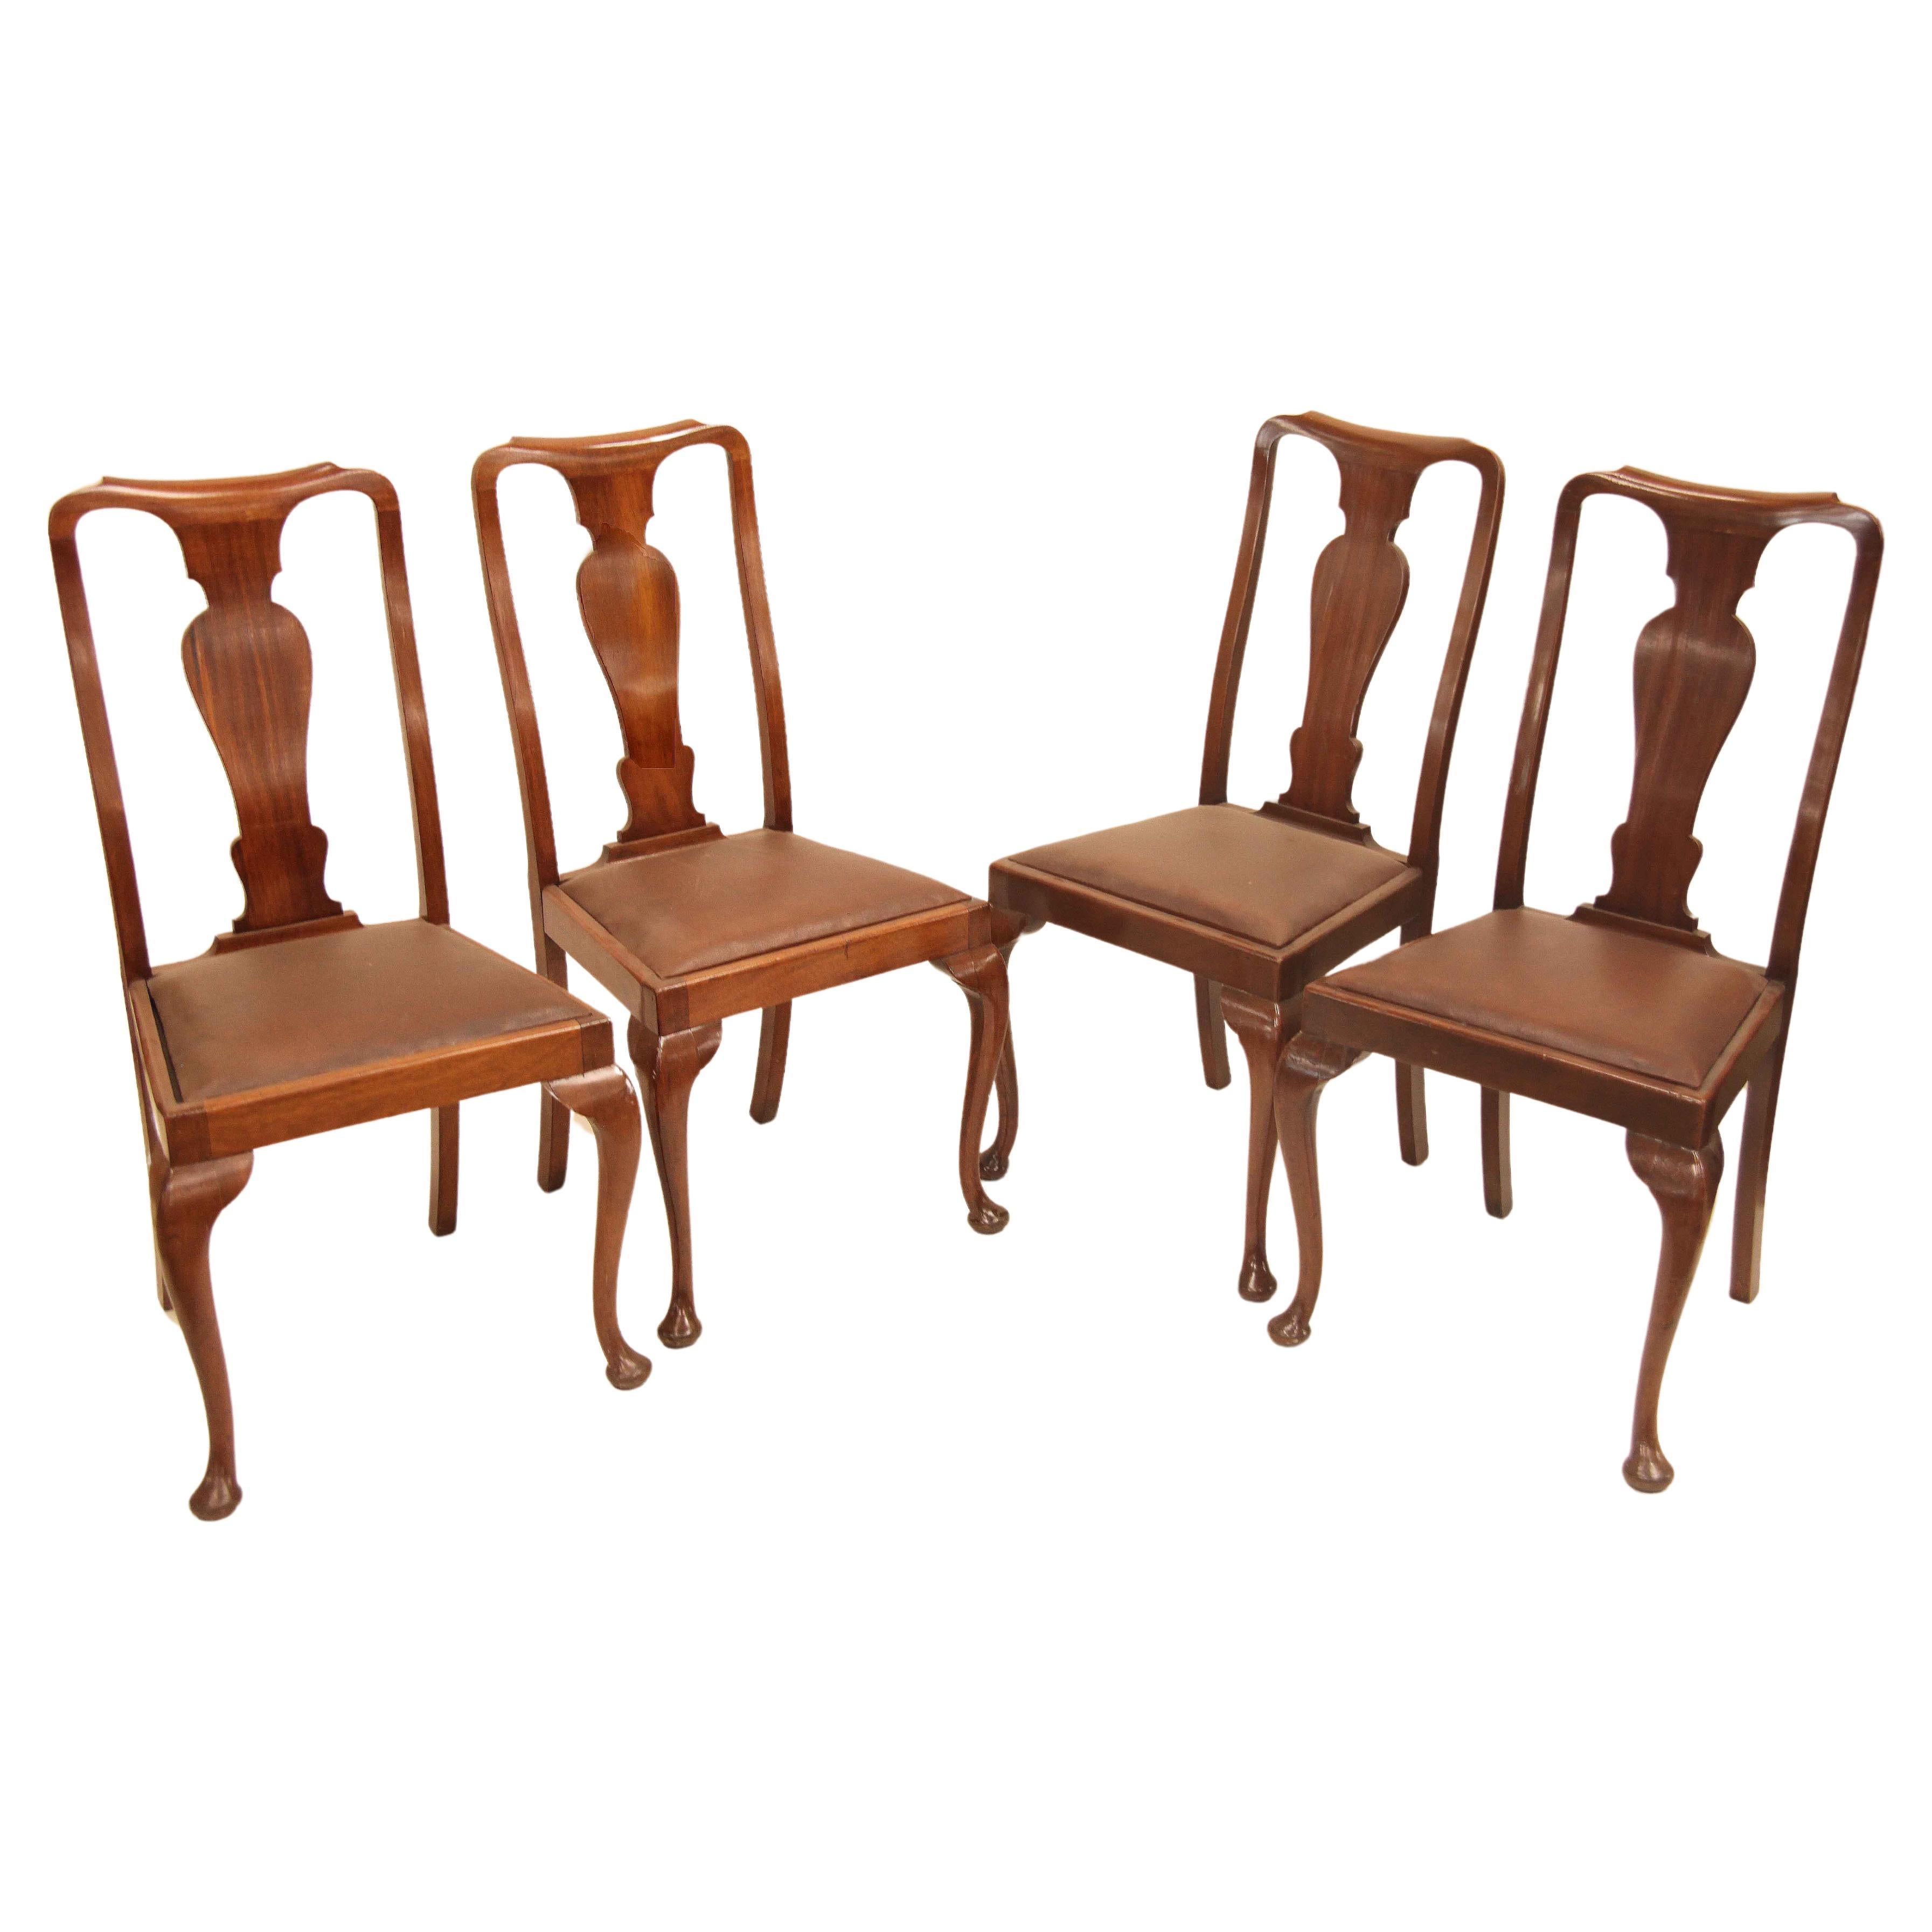 Set of Four Mahogany Queen Anne Style Chairs